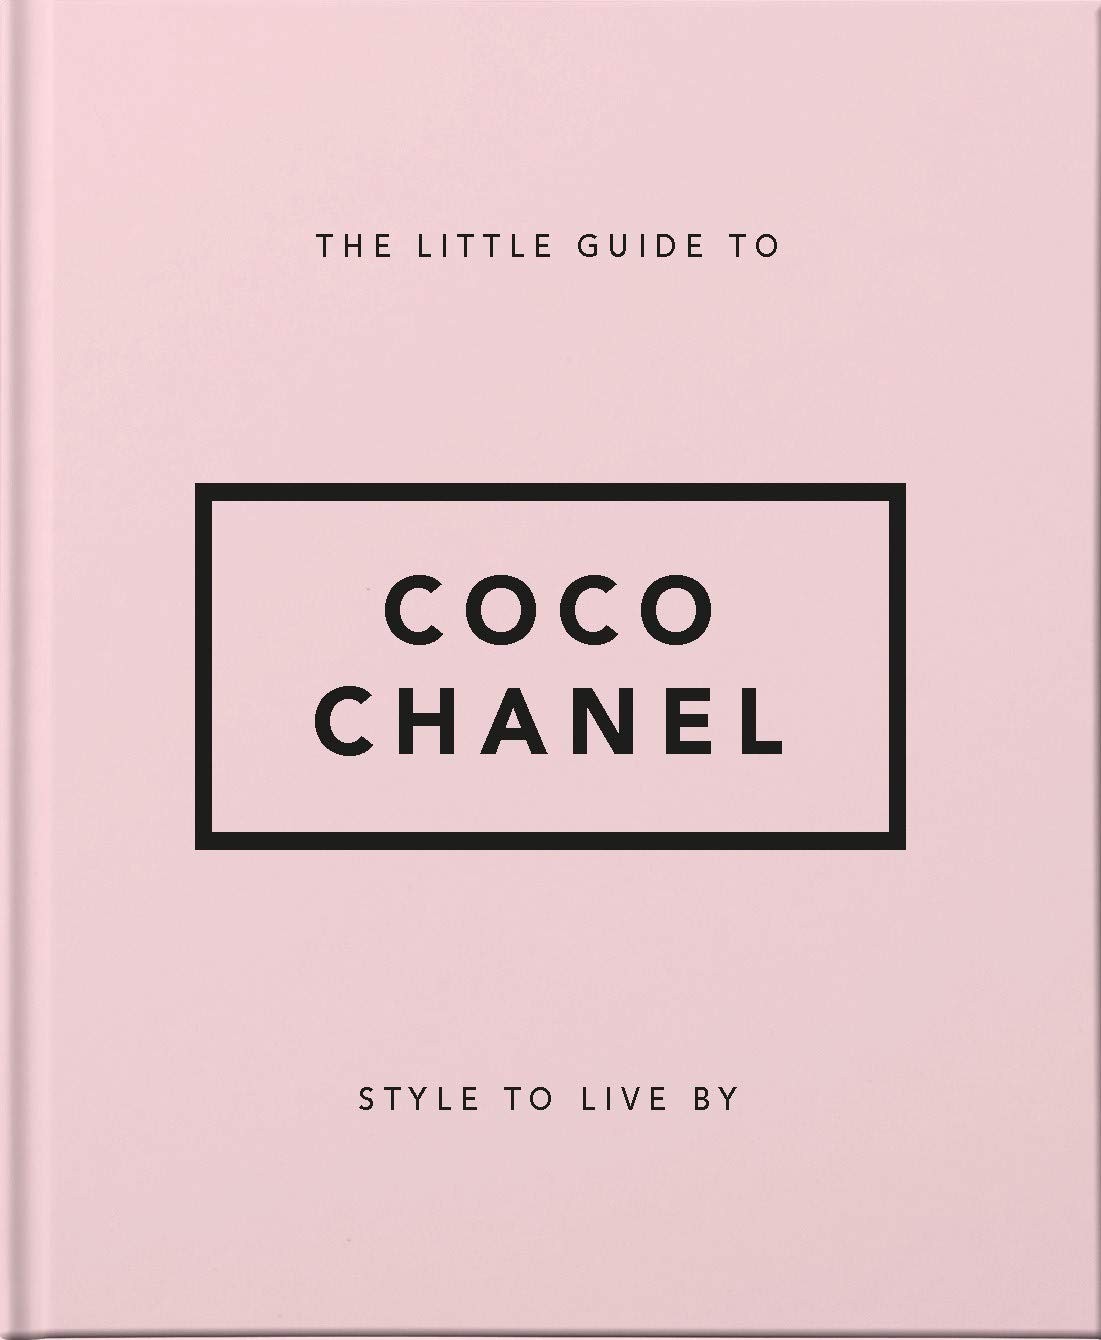 The Little Guide to Coco Chanel: Style to Live by (Foto: Reprodução/ Amazon)